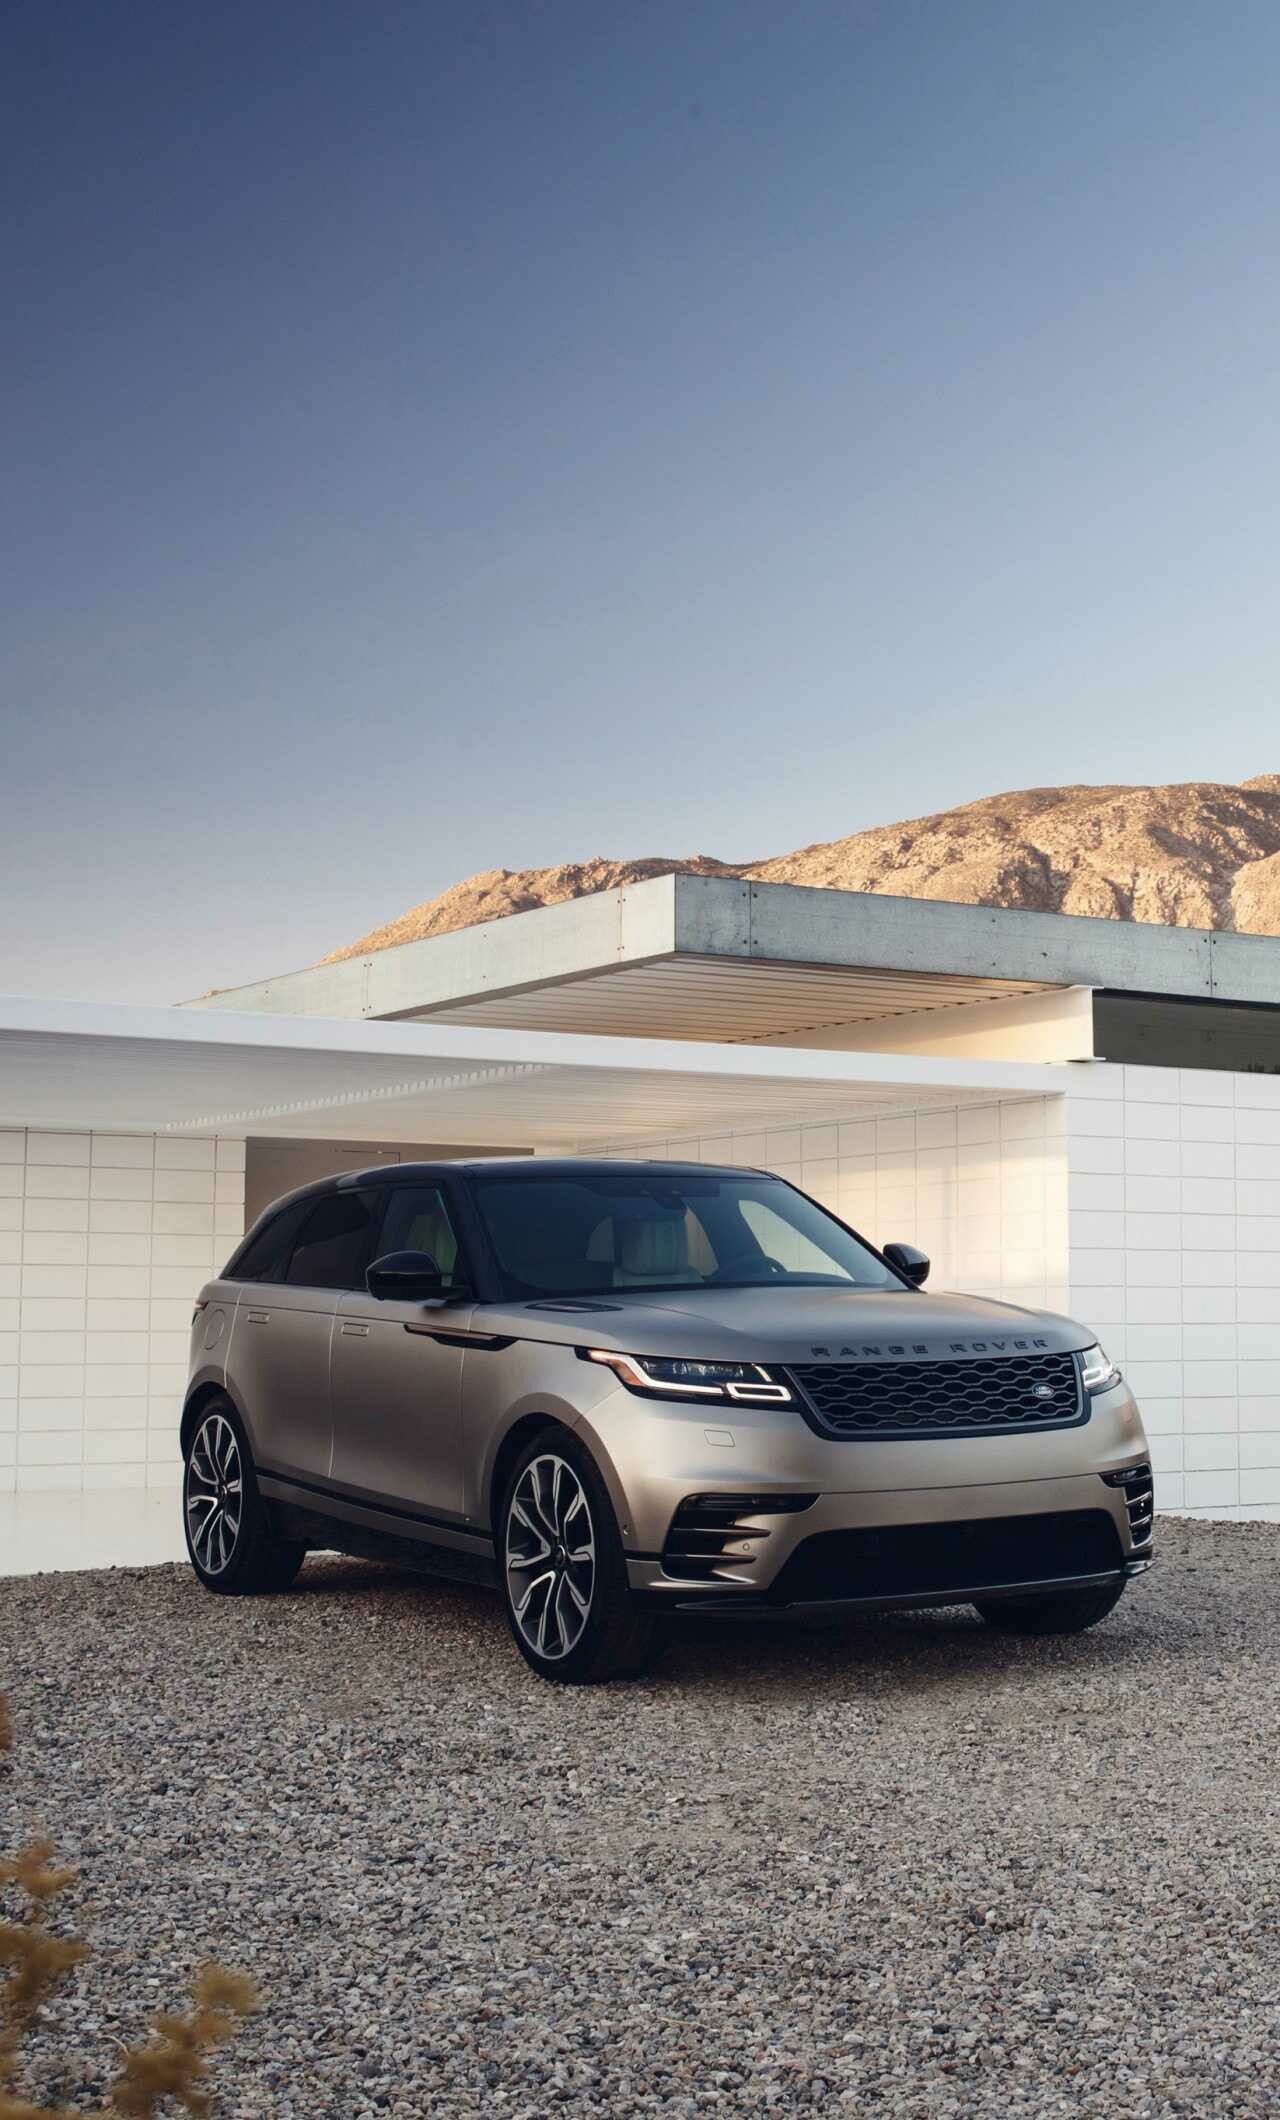 Range Rover: The model Velar was introduced in 2017, Vehicle. 1280x2120 HD Background.